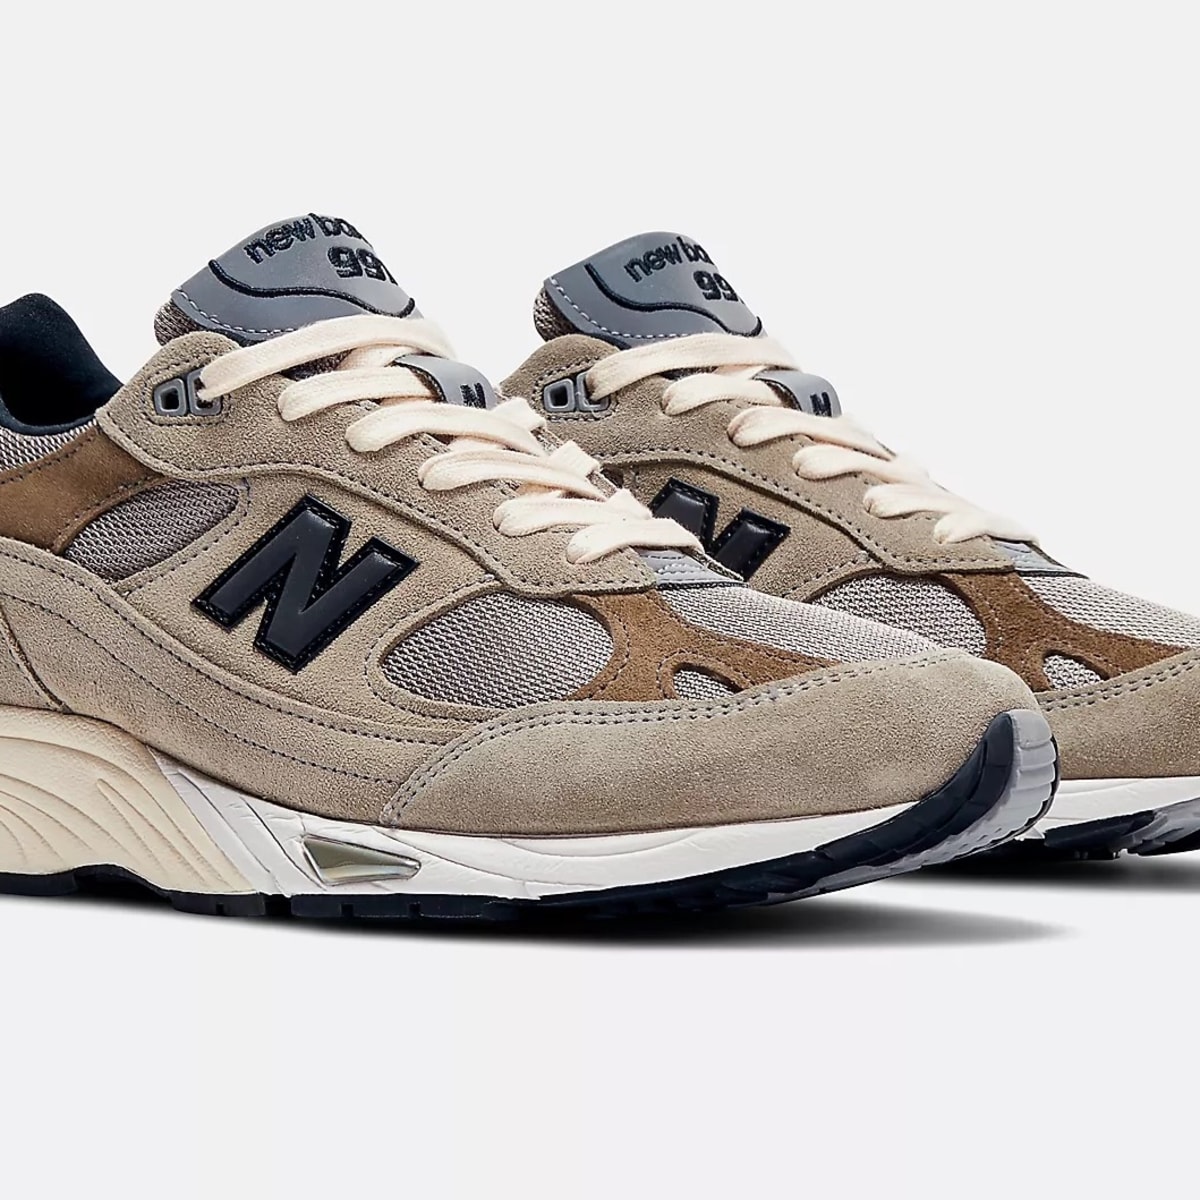 JJJJound releases its Made in UK New Balance 991 - Acquire